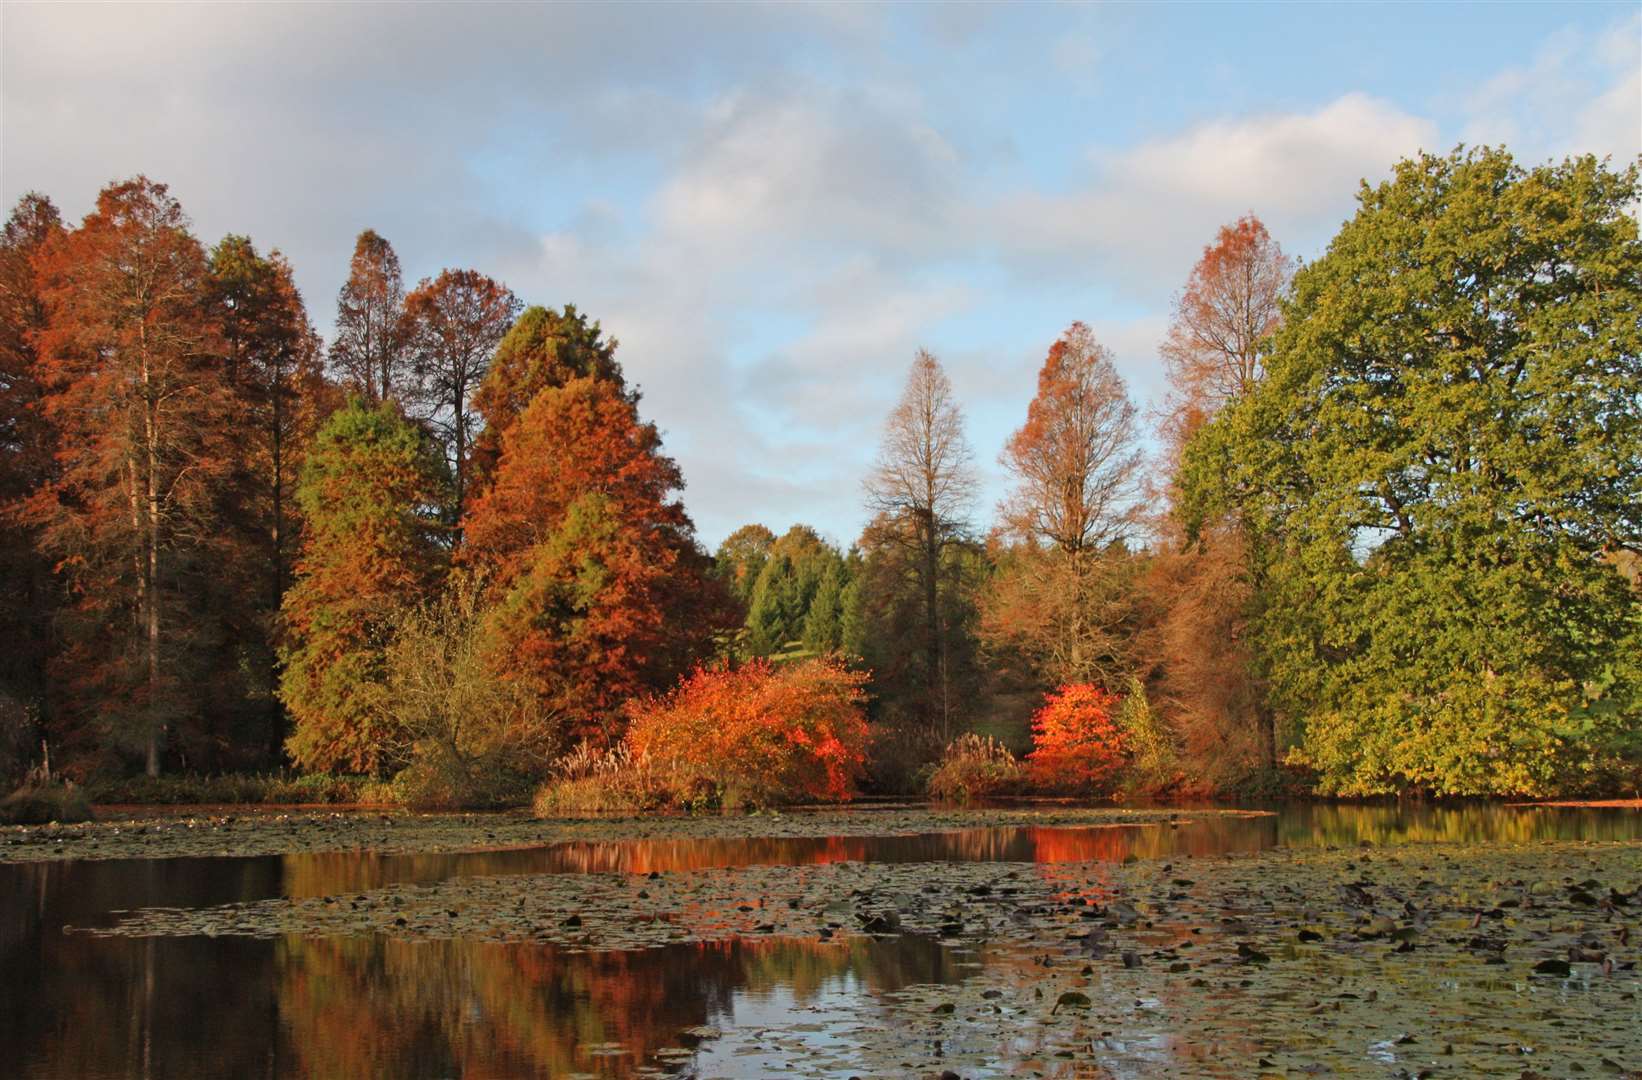 Enjoy some time among the trees at Bedgebury Pinetum